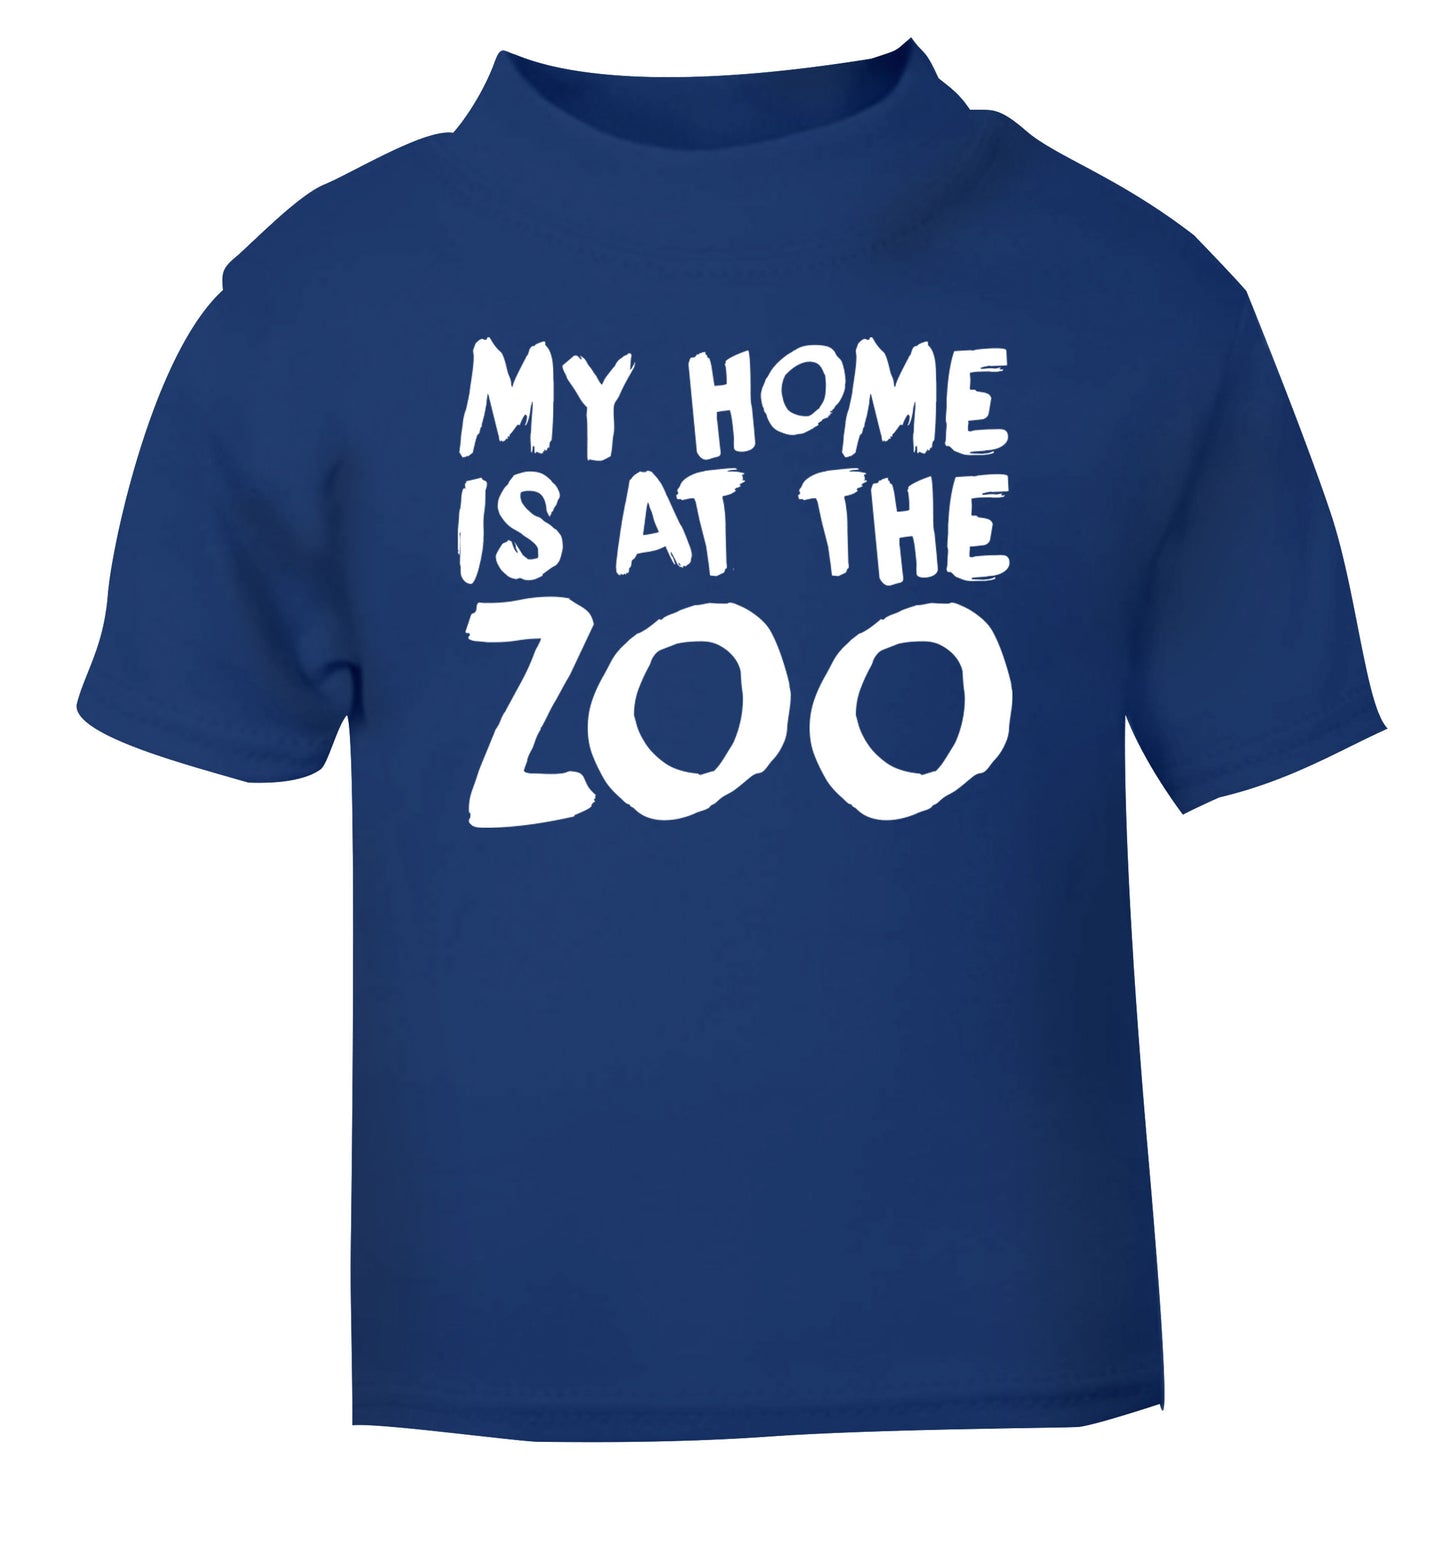 My home is at the zoo blue Baby Toddler Tshirt 2 Years